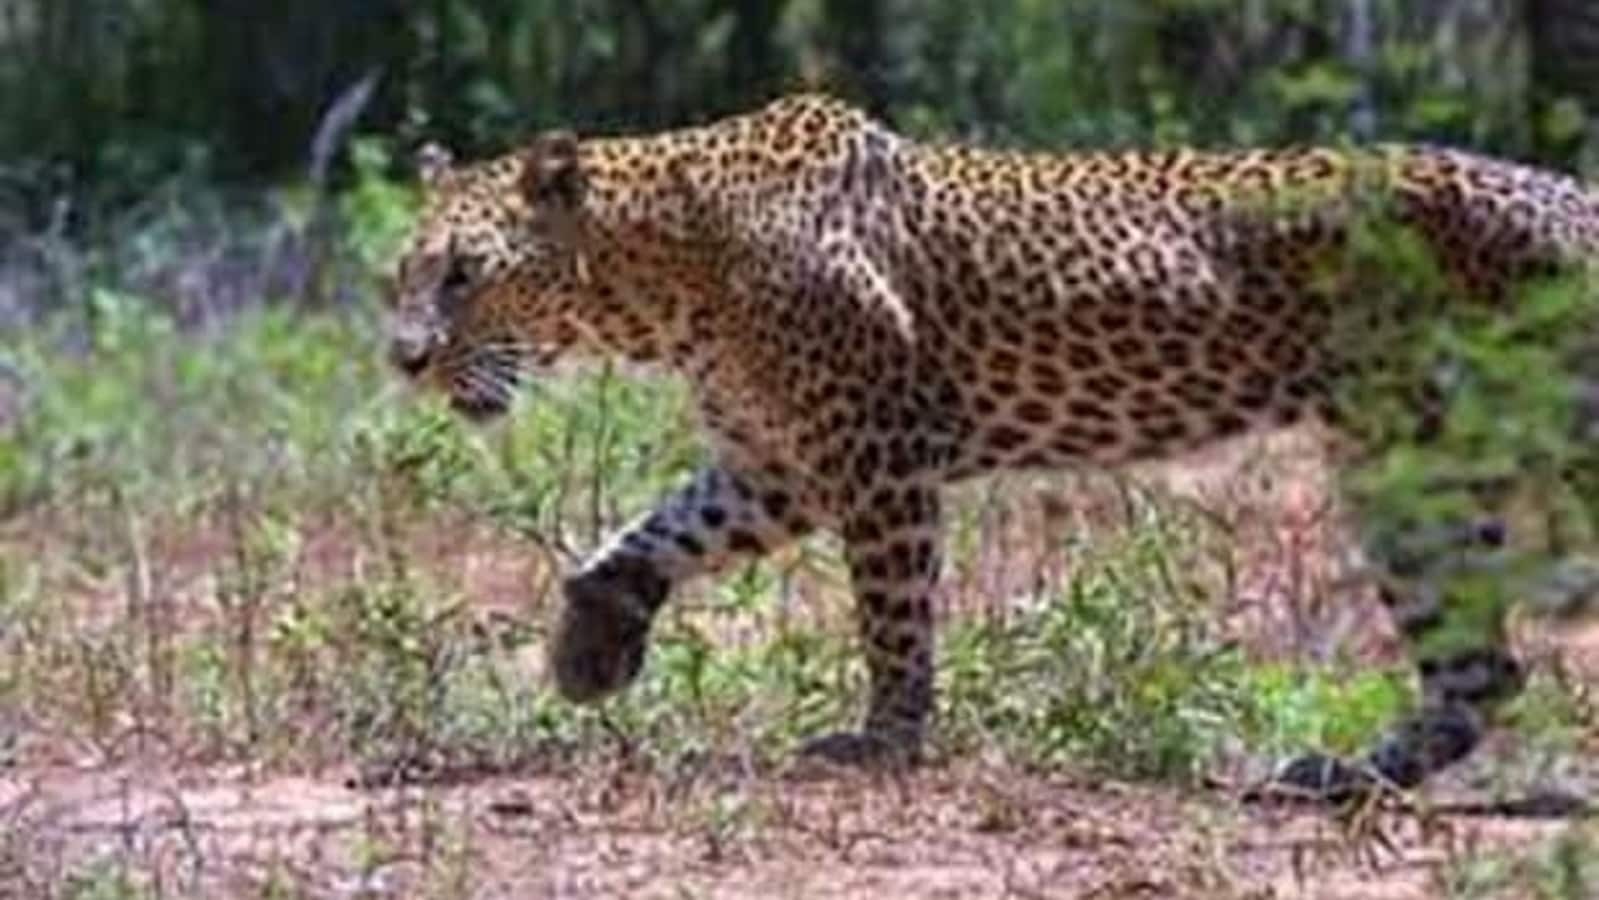 Leopard spotted walking on a boundary wall in Mumbai. Scary moment captured on camera